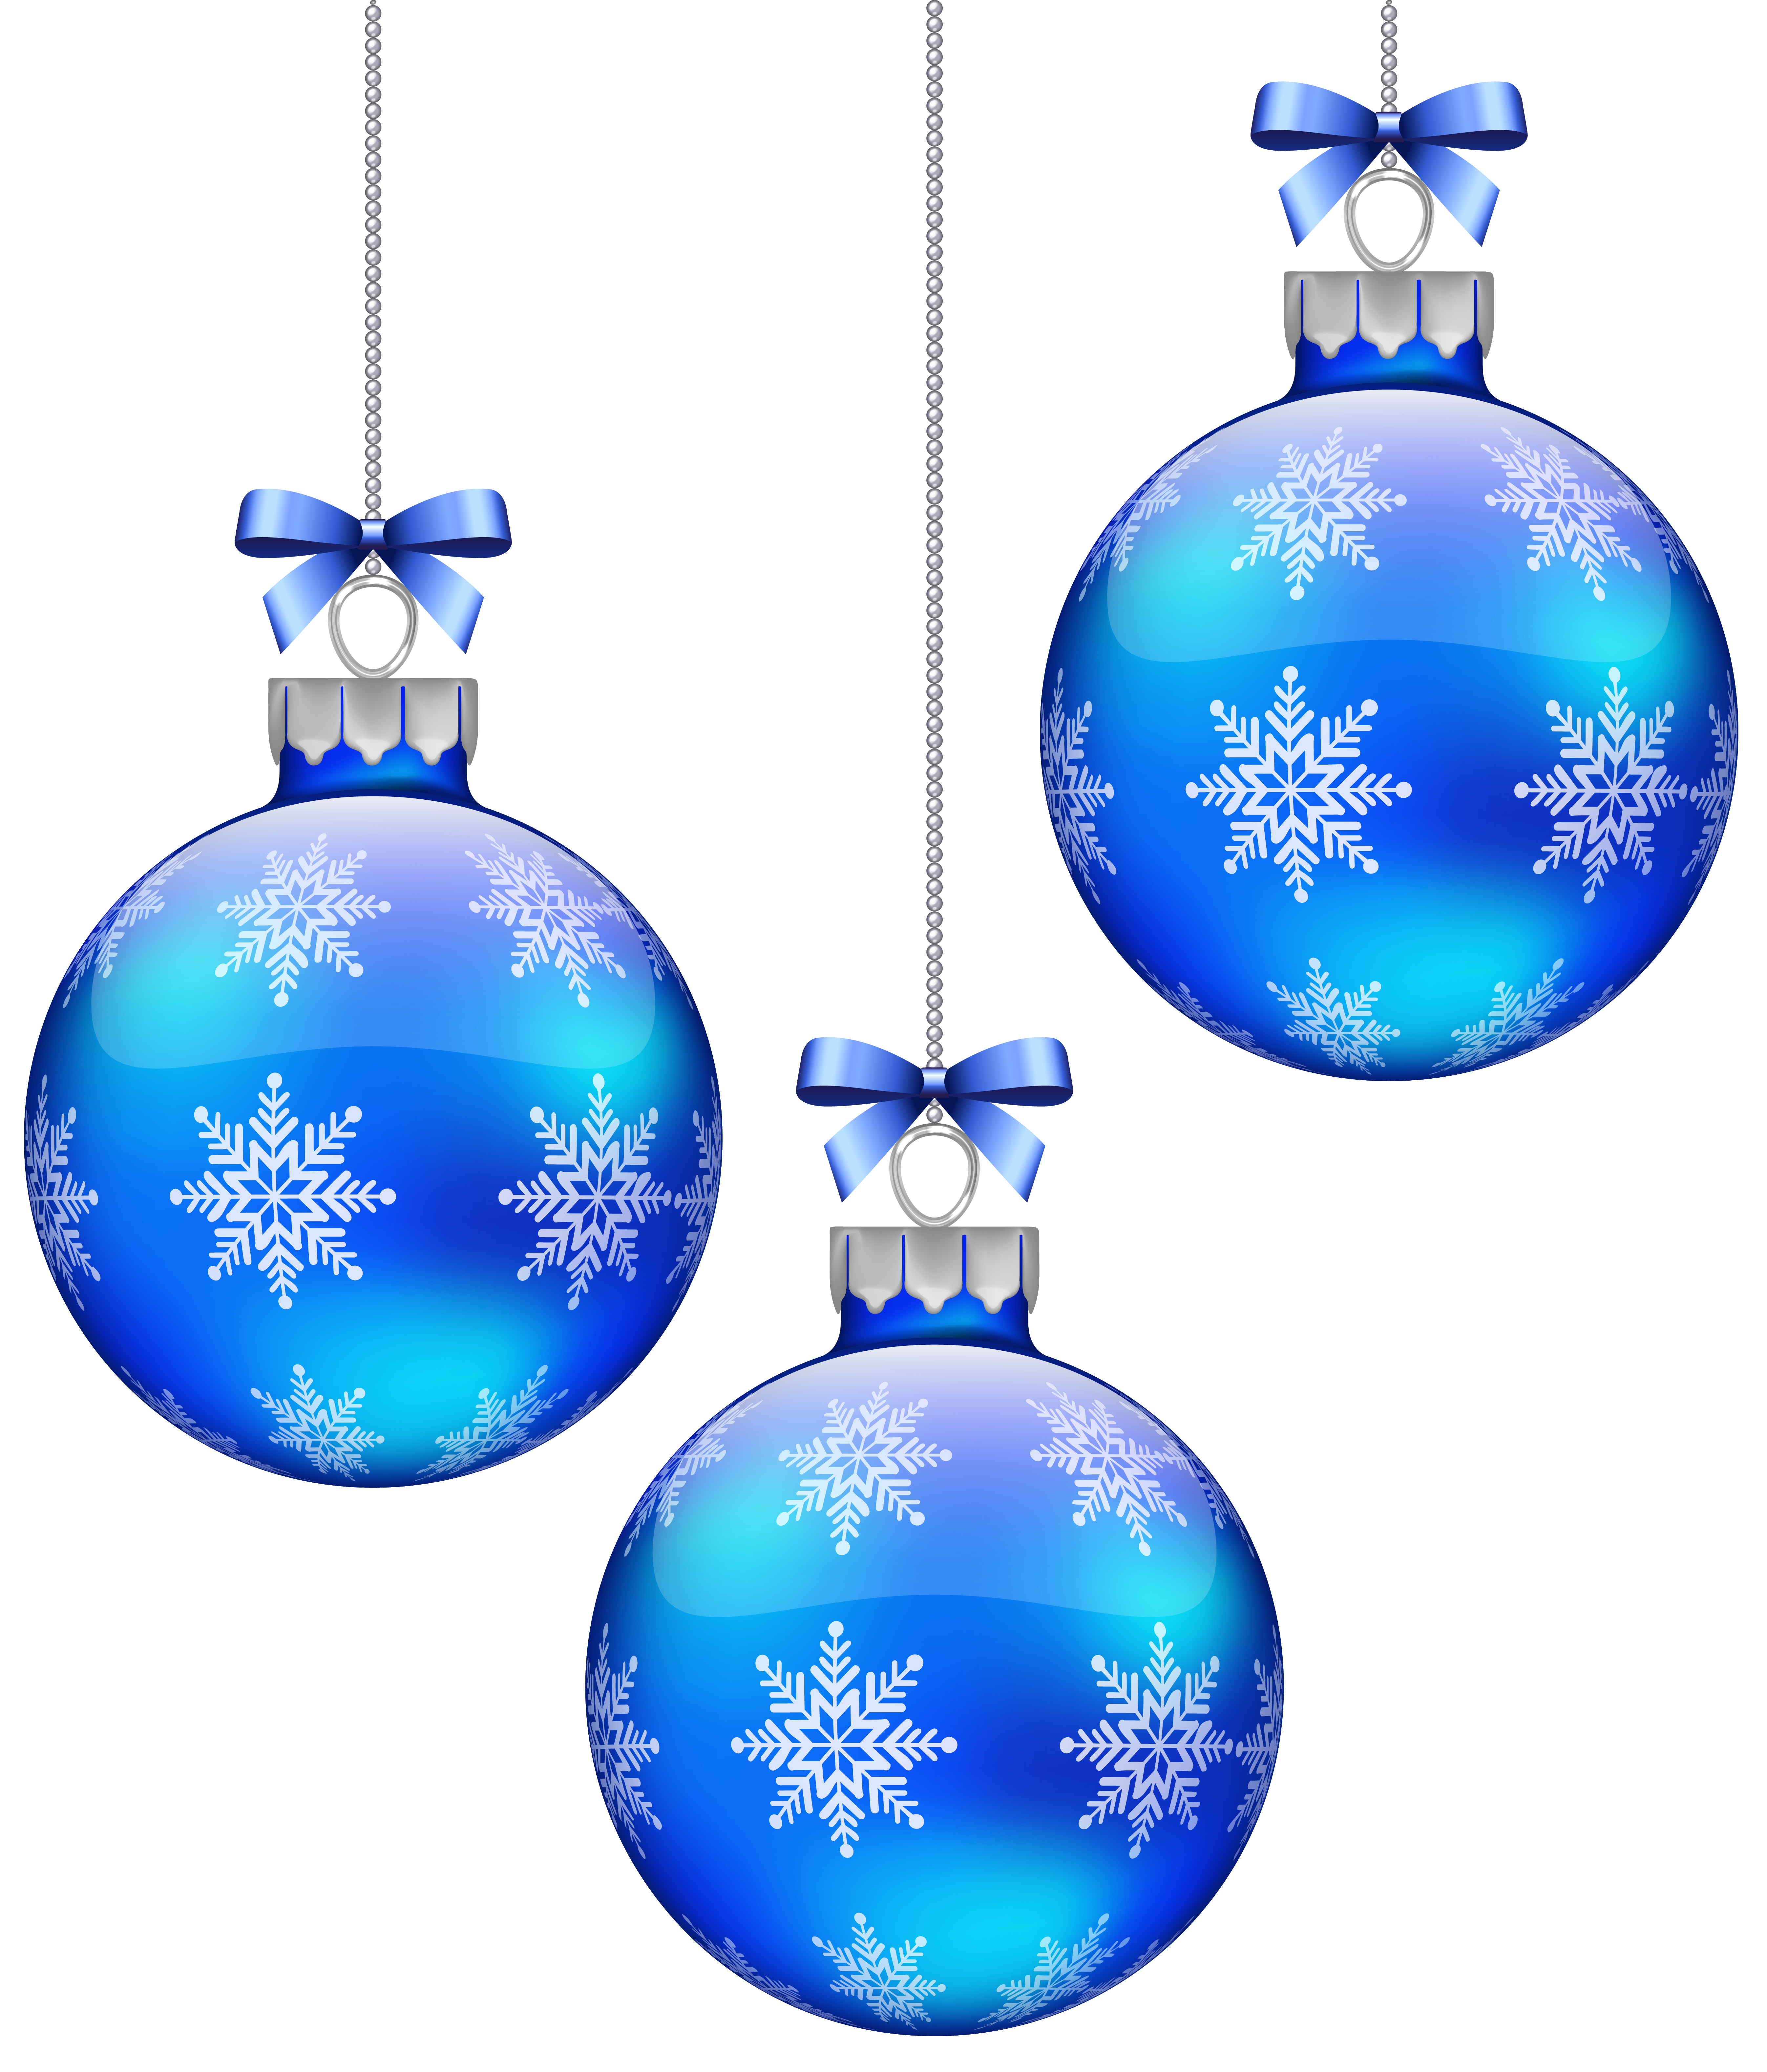 Blue Christmas Balls Decoration PNG Clipart Image | Gallery ...